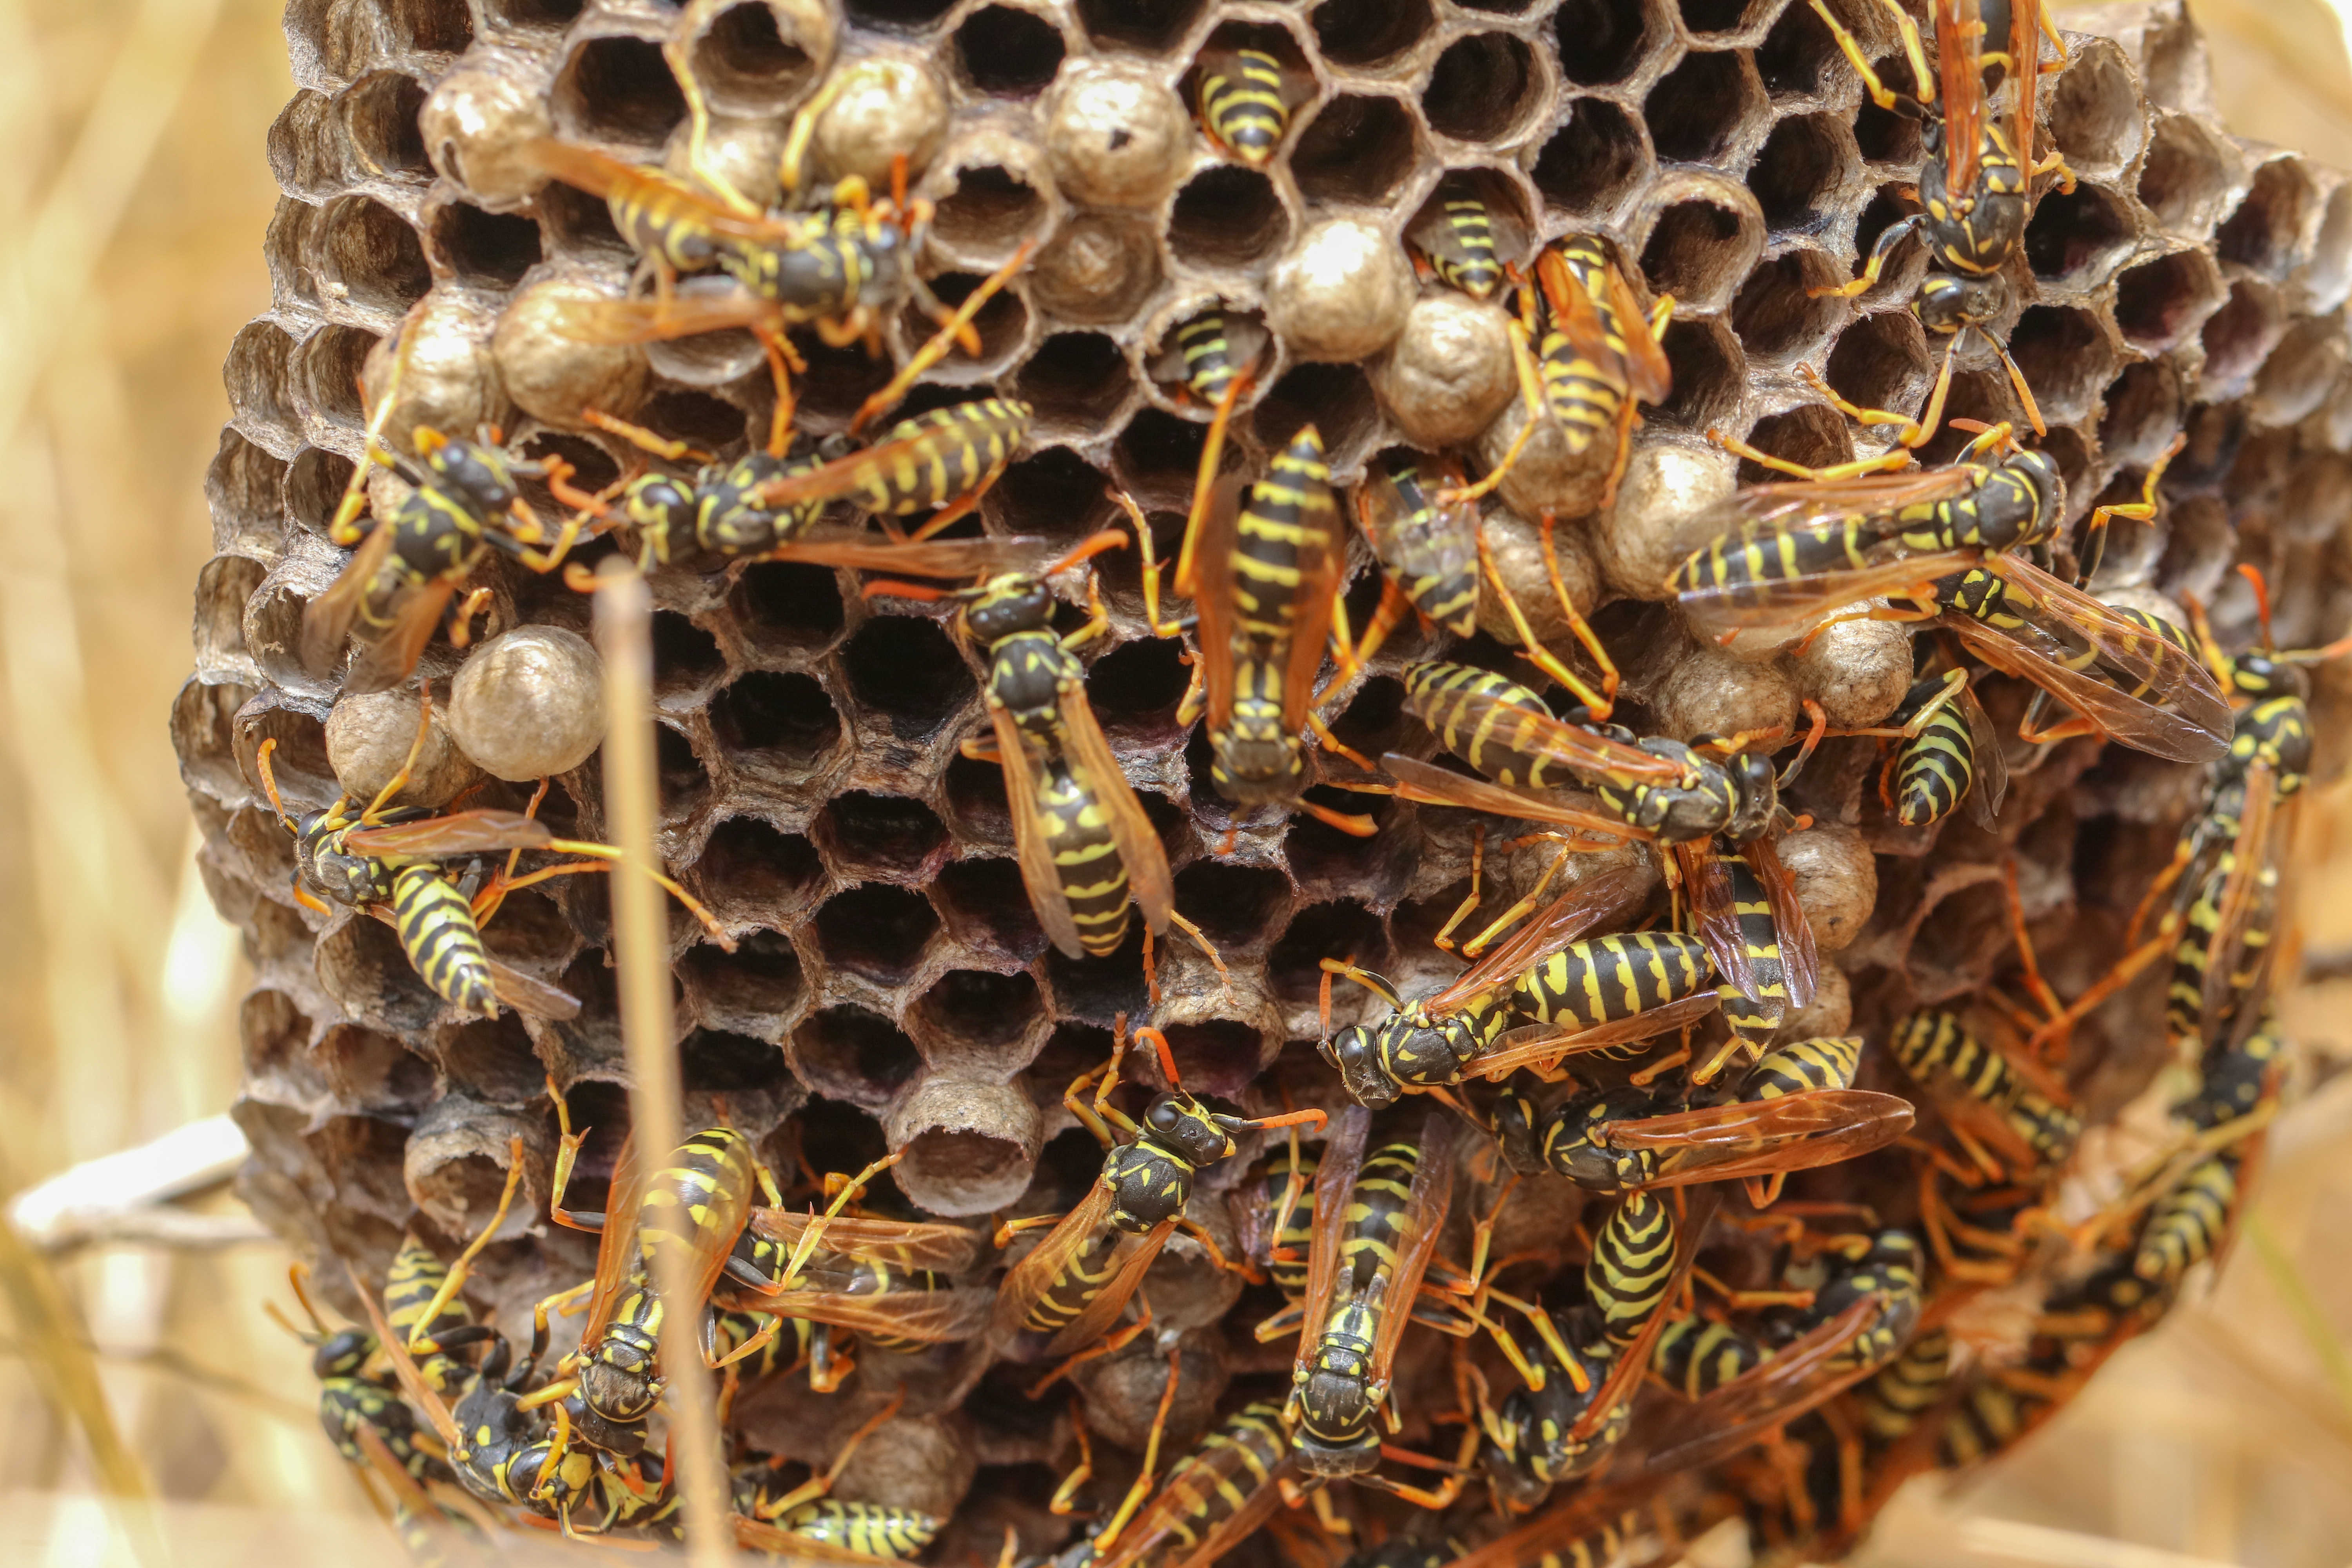 A hornets nests - learn how GGA Pest Management Temple can help with our hornet pest control services.